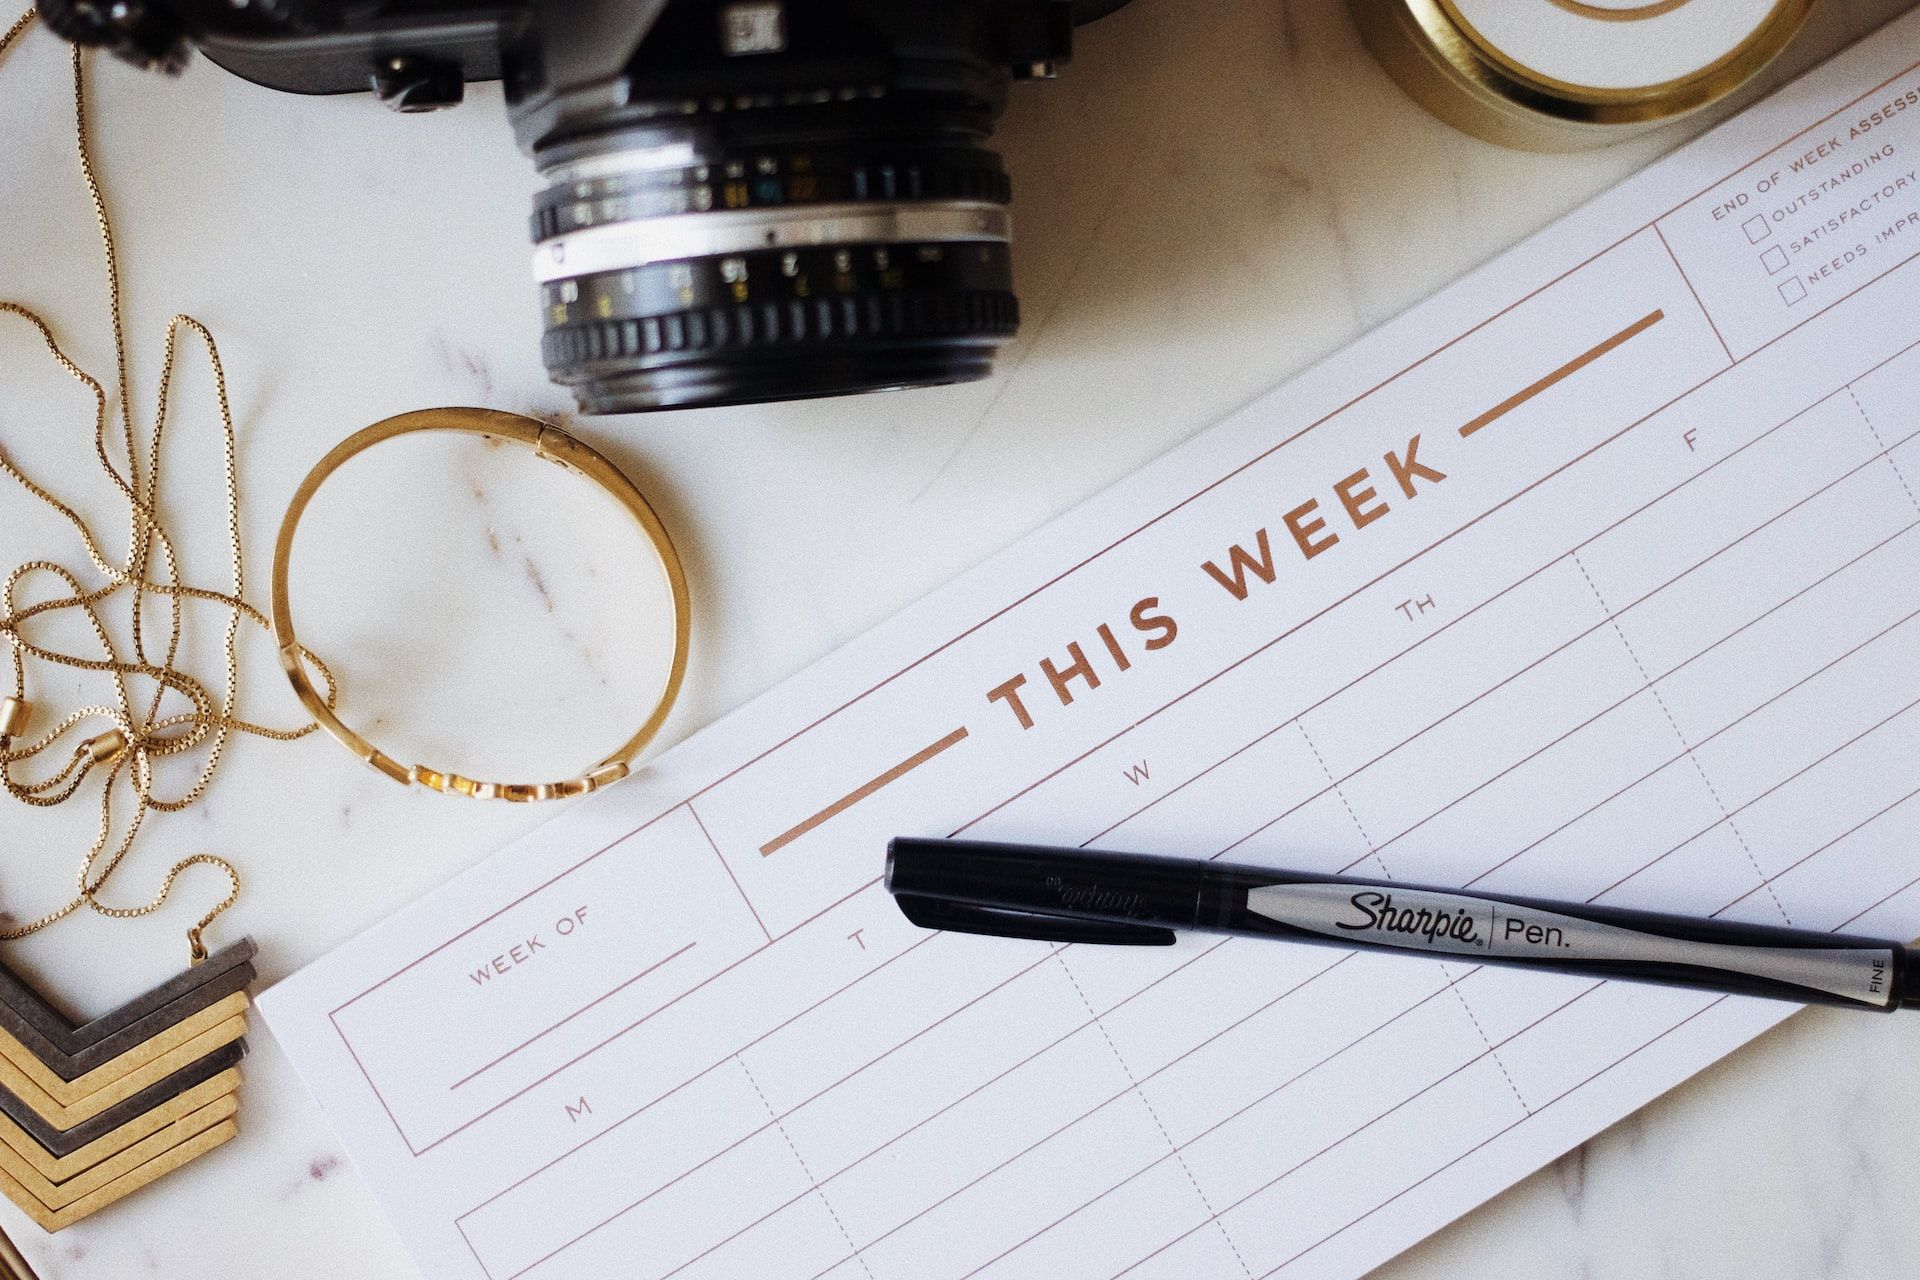 Picture of a blank weekly planner with a Sharpie pen laid across it and some jewellery and a camera around it